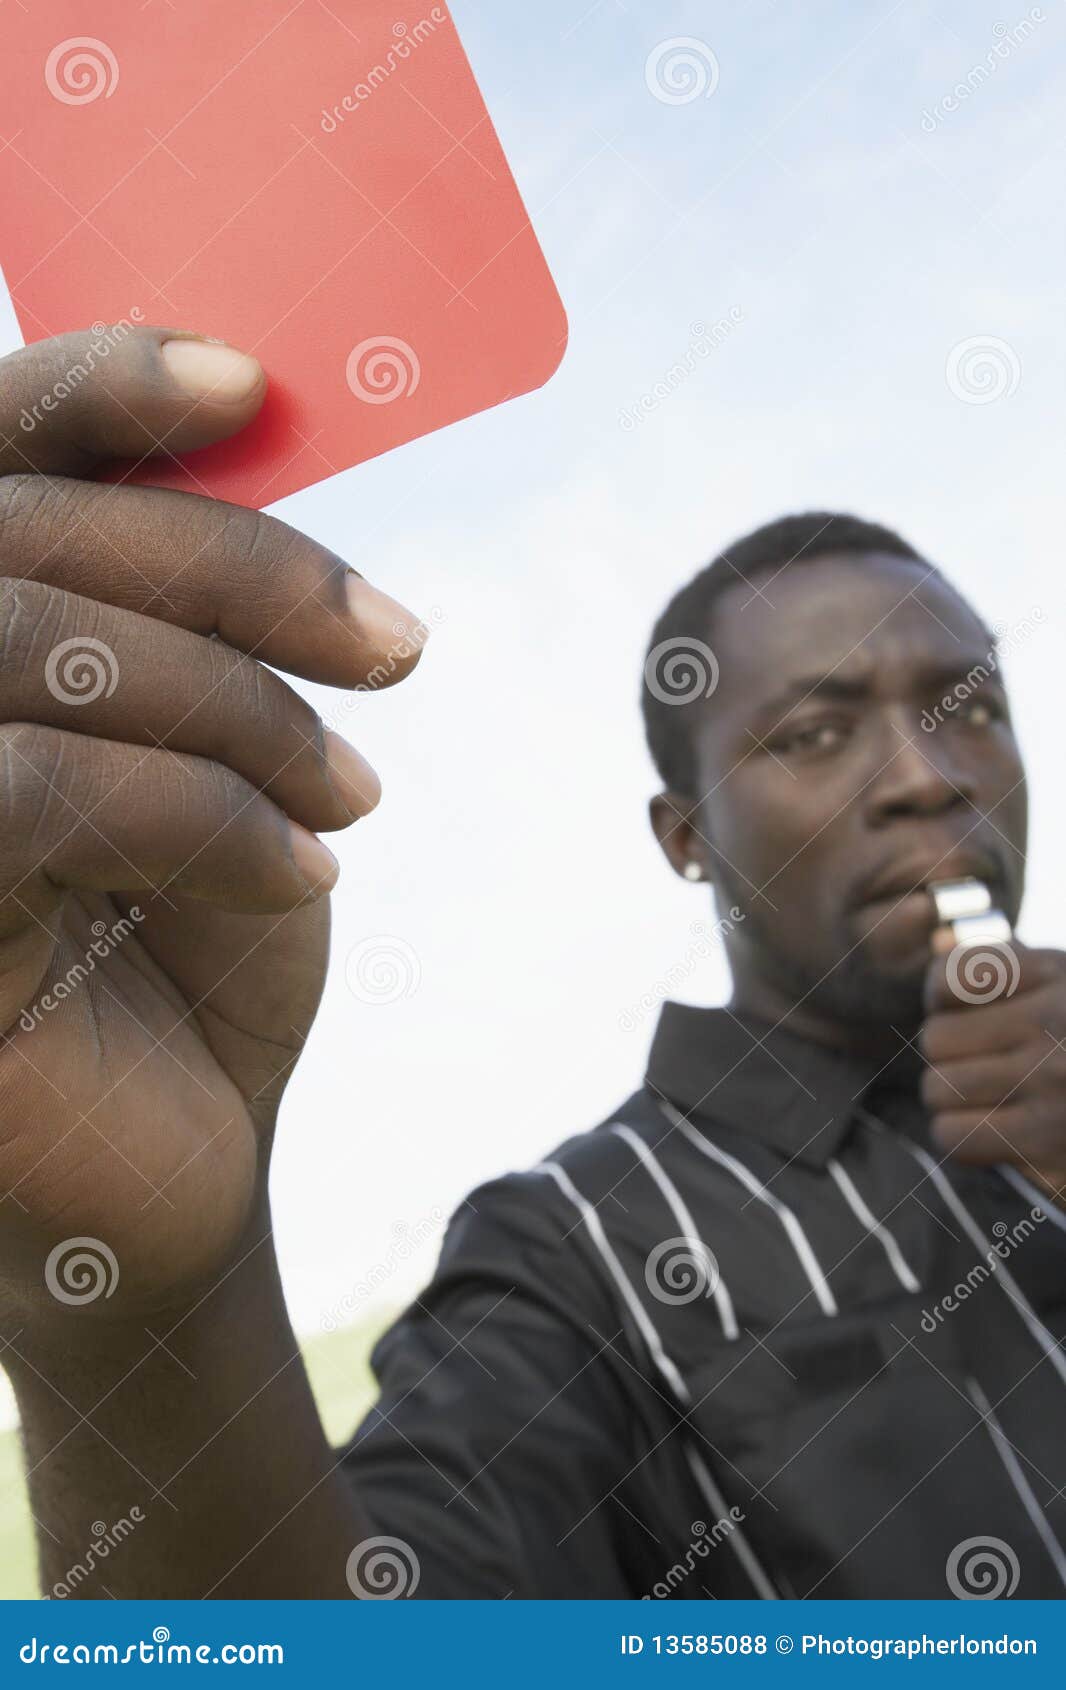 Soccer Referee Holding Out Red Card and Whistle Stock Photo